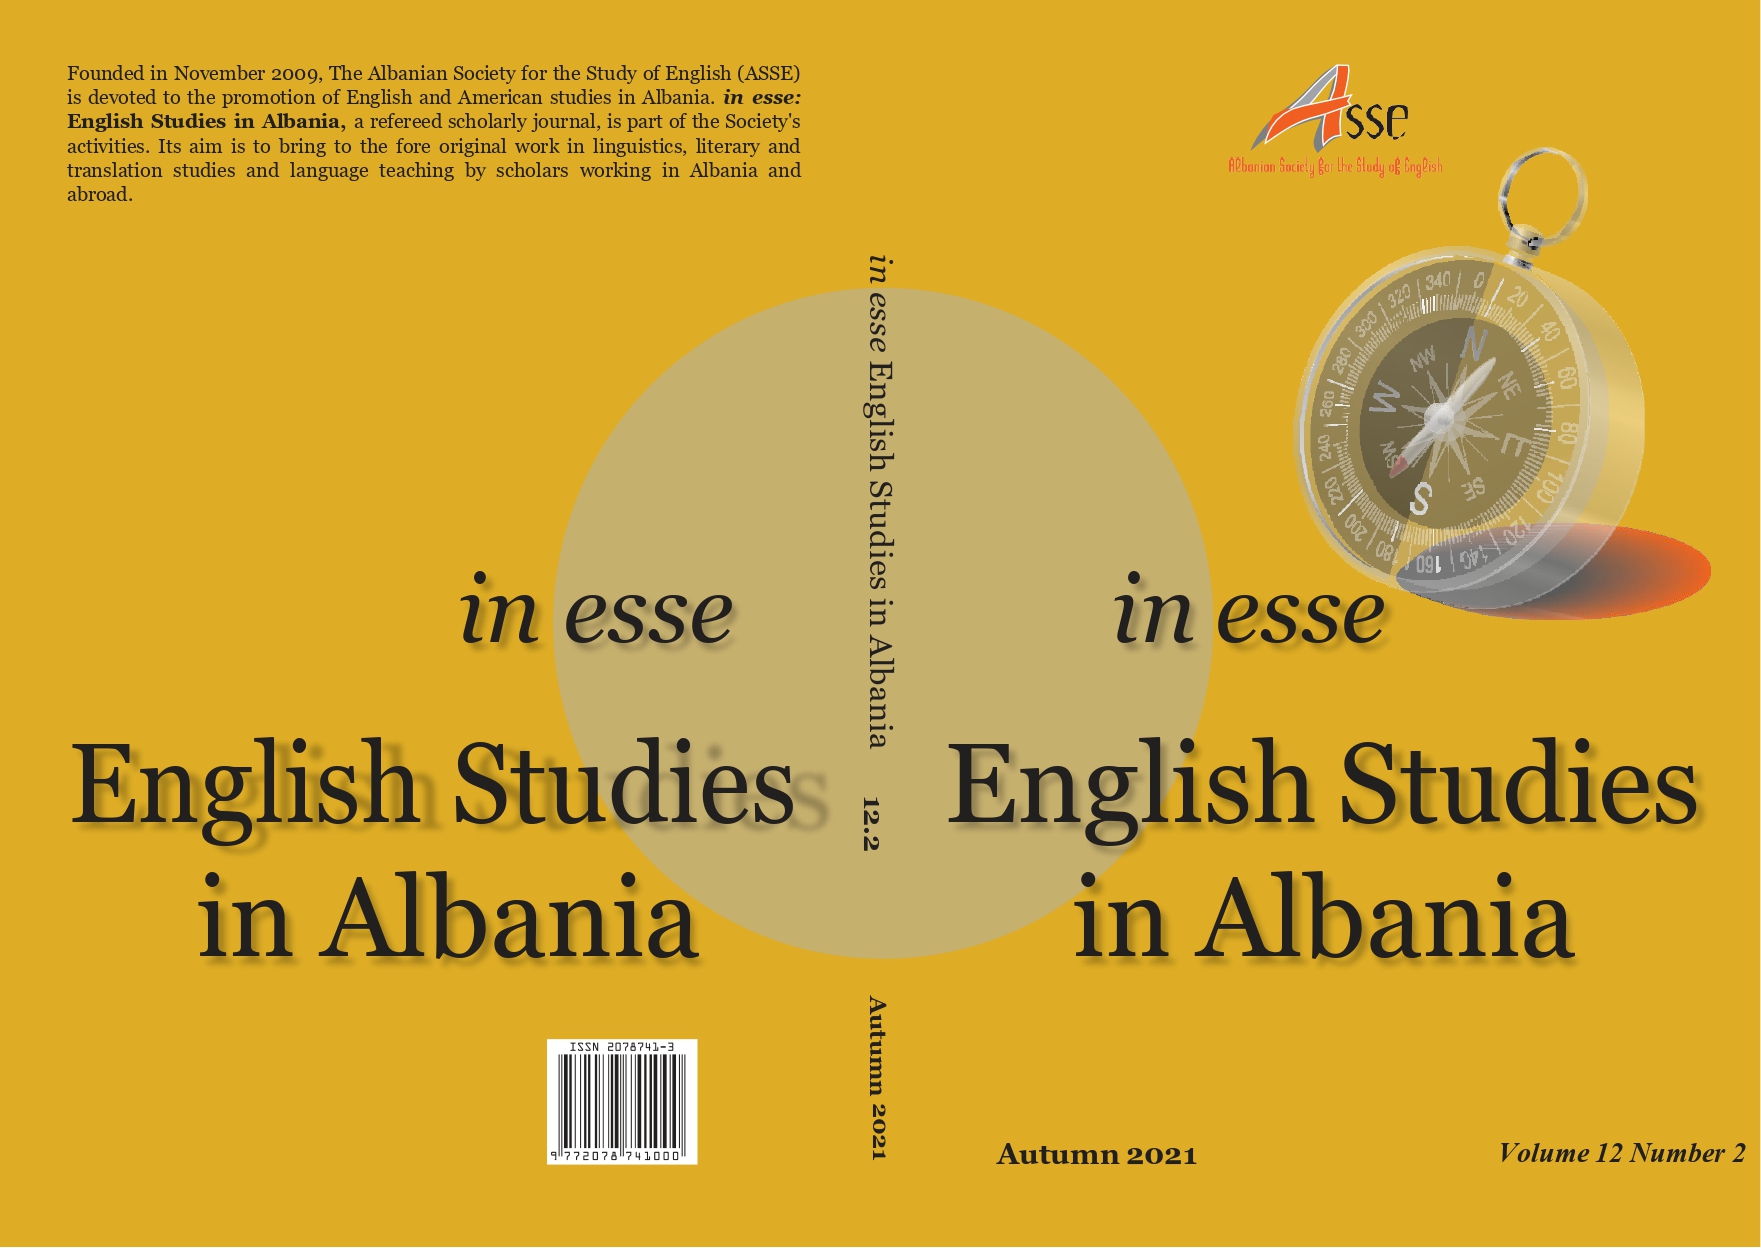 Albanians’ English fluency and its relevance to language learning, globally